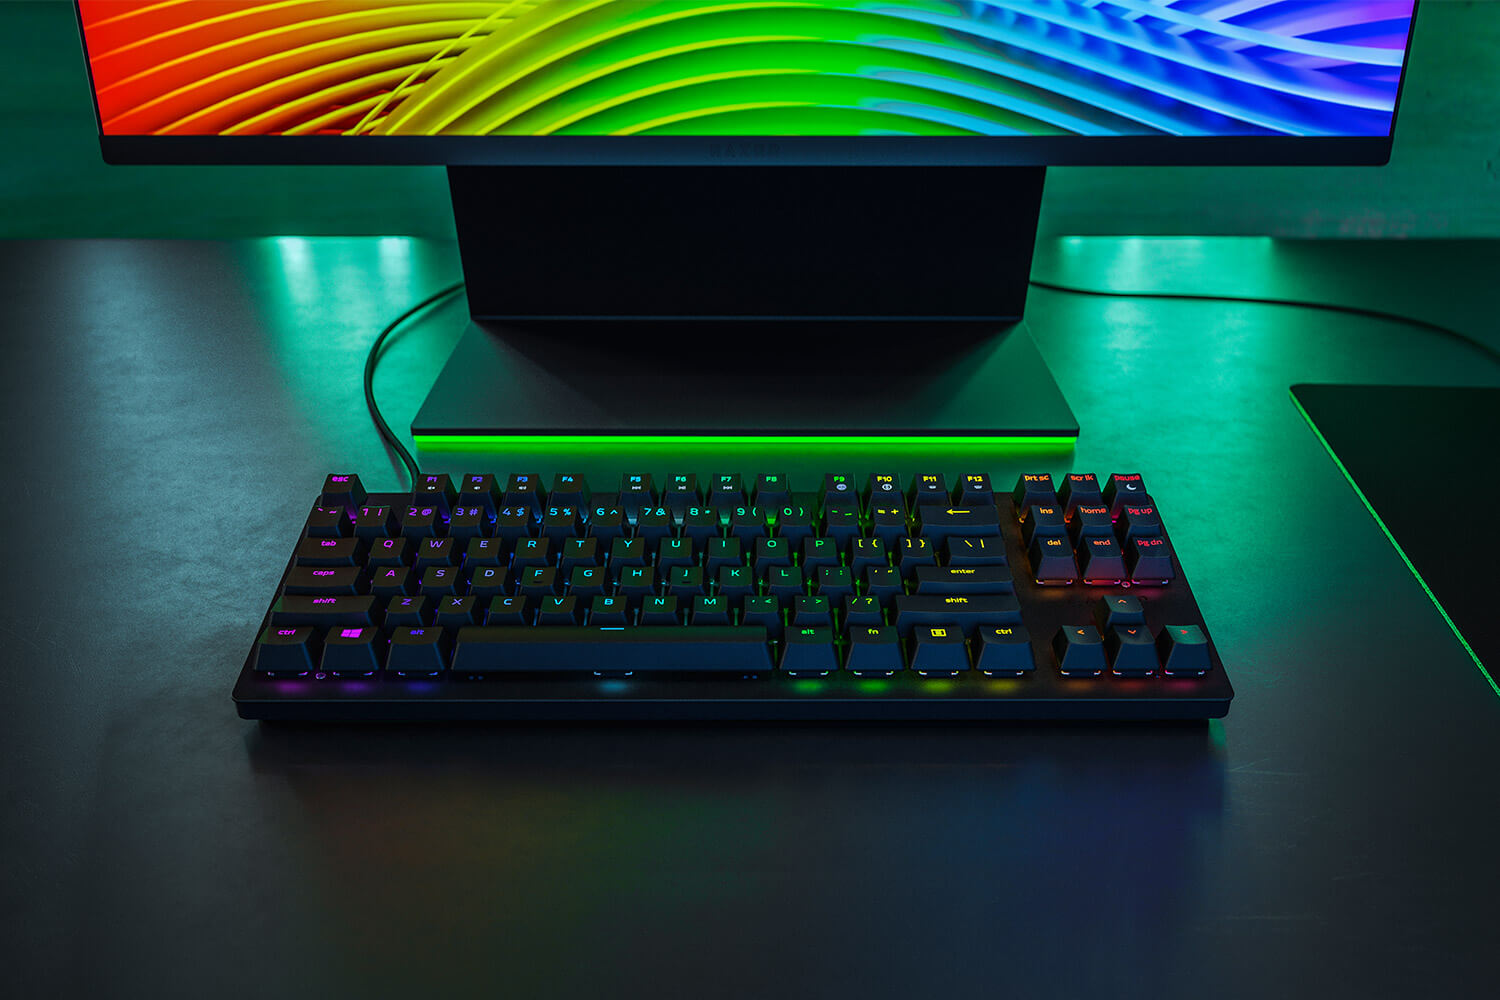 The Newly Announced Razer Huntsman Tournament Edition (TE) Promises Competitive Gaming At The Speed Of Light